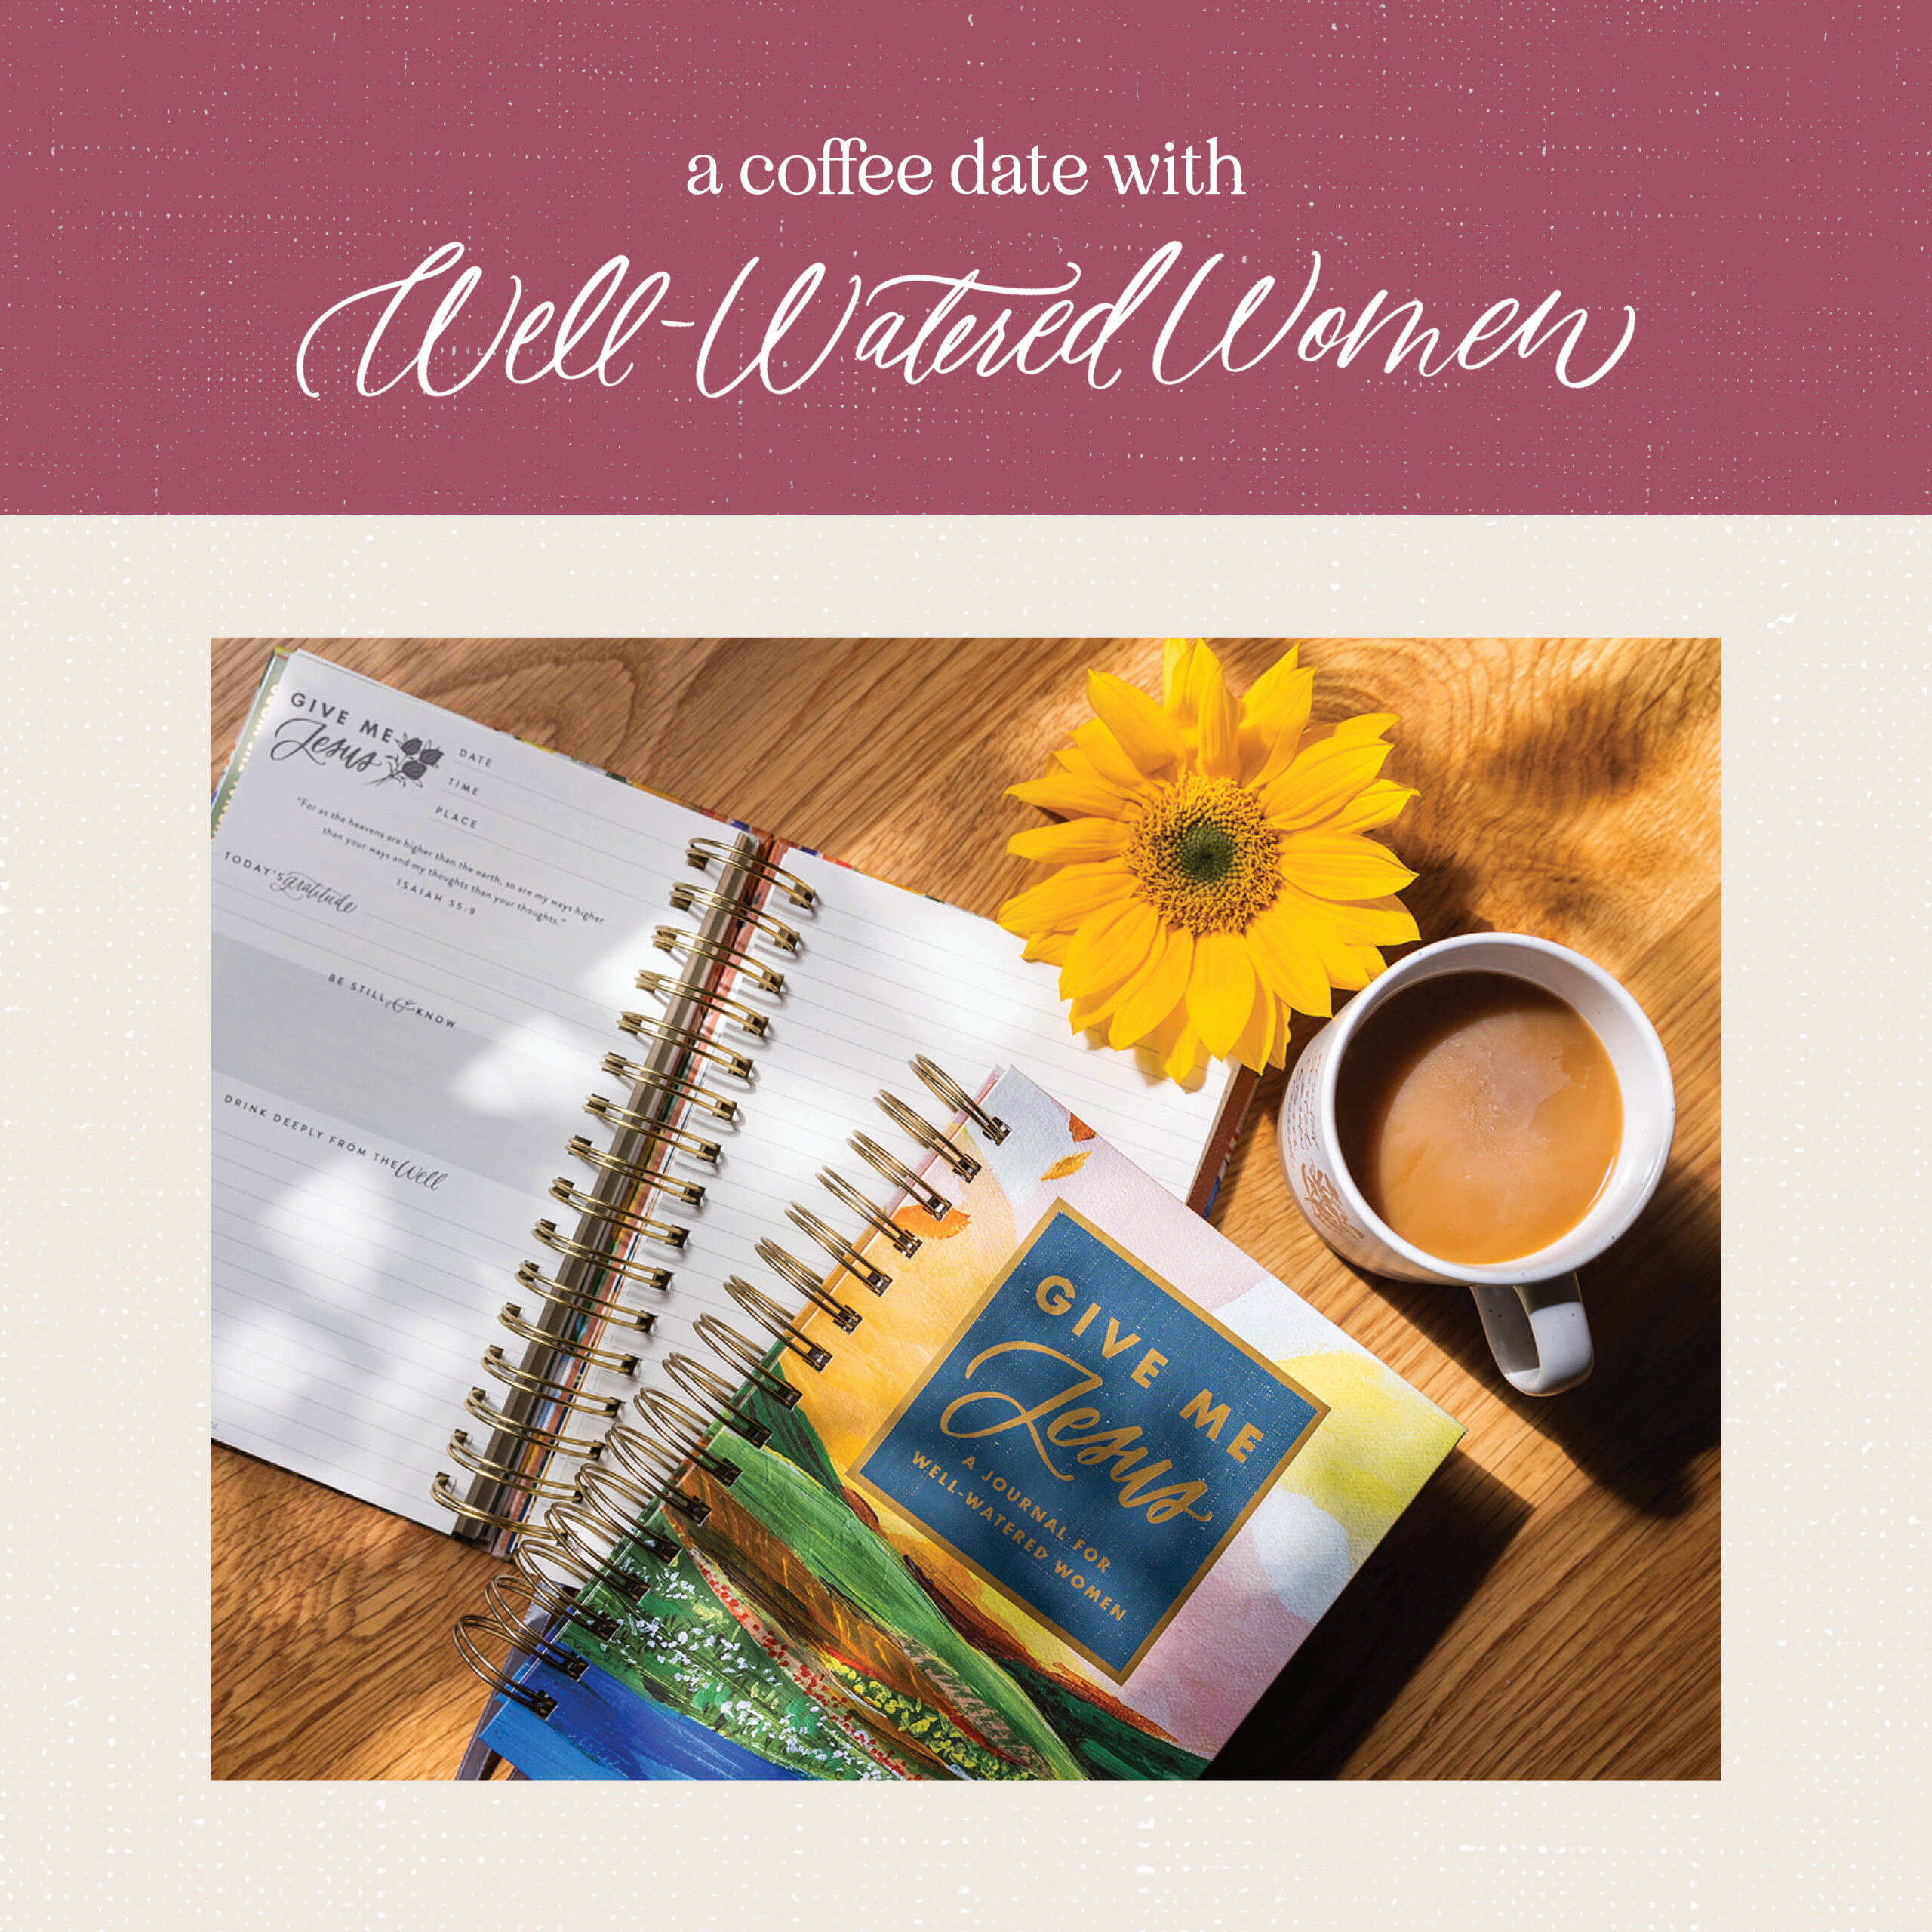 Our March Coffee Date - an article from Well-Watered Women